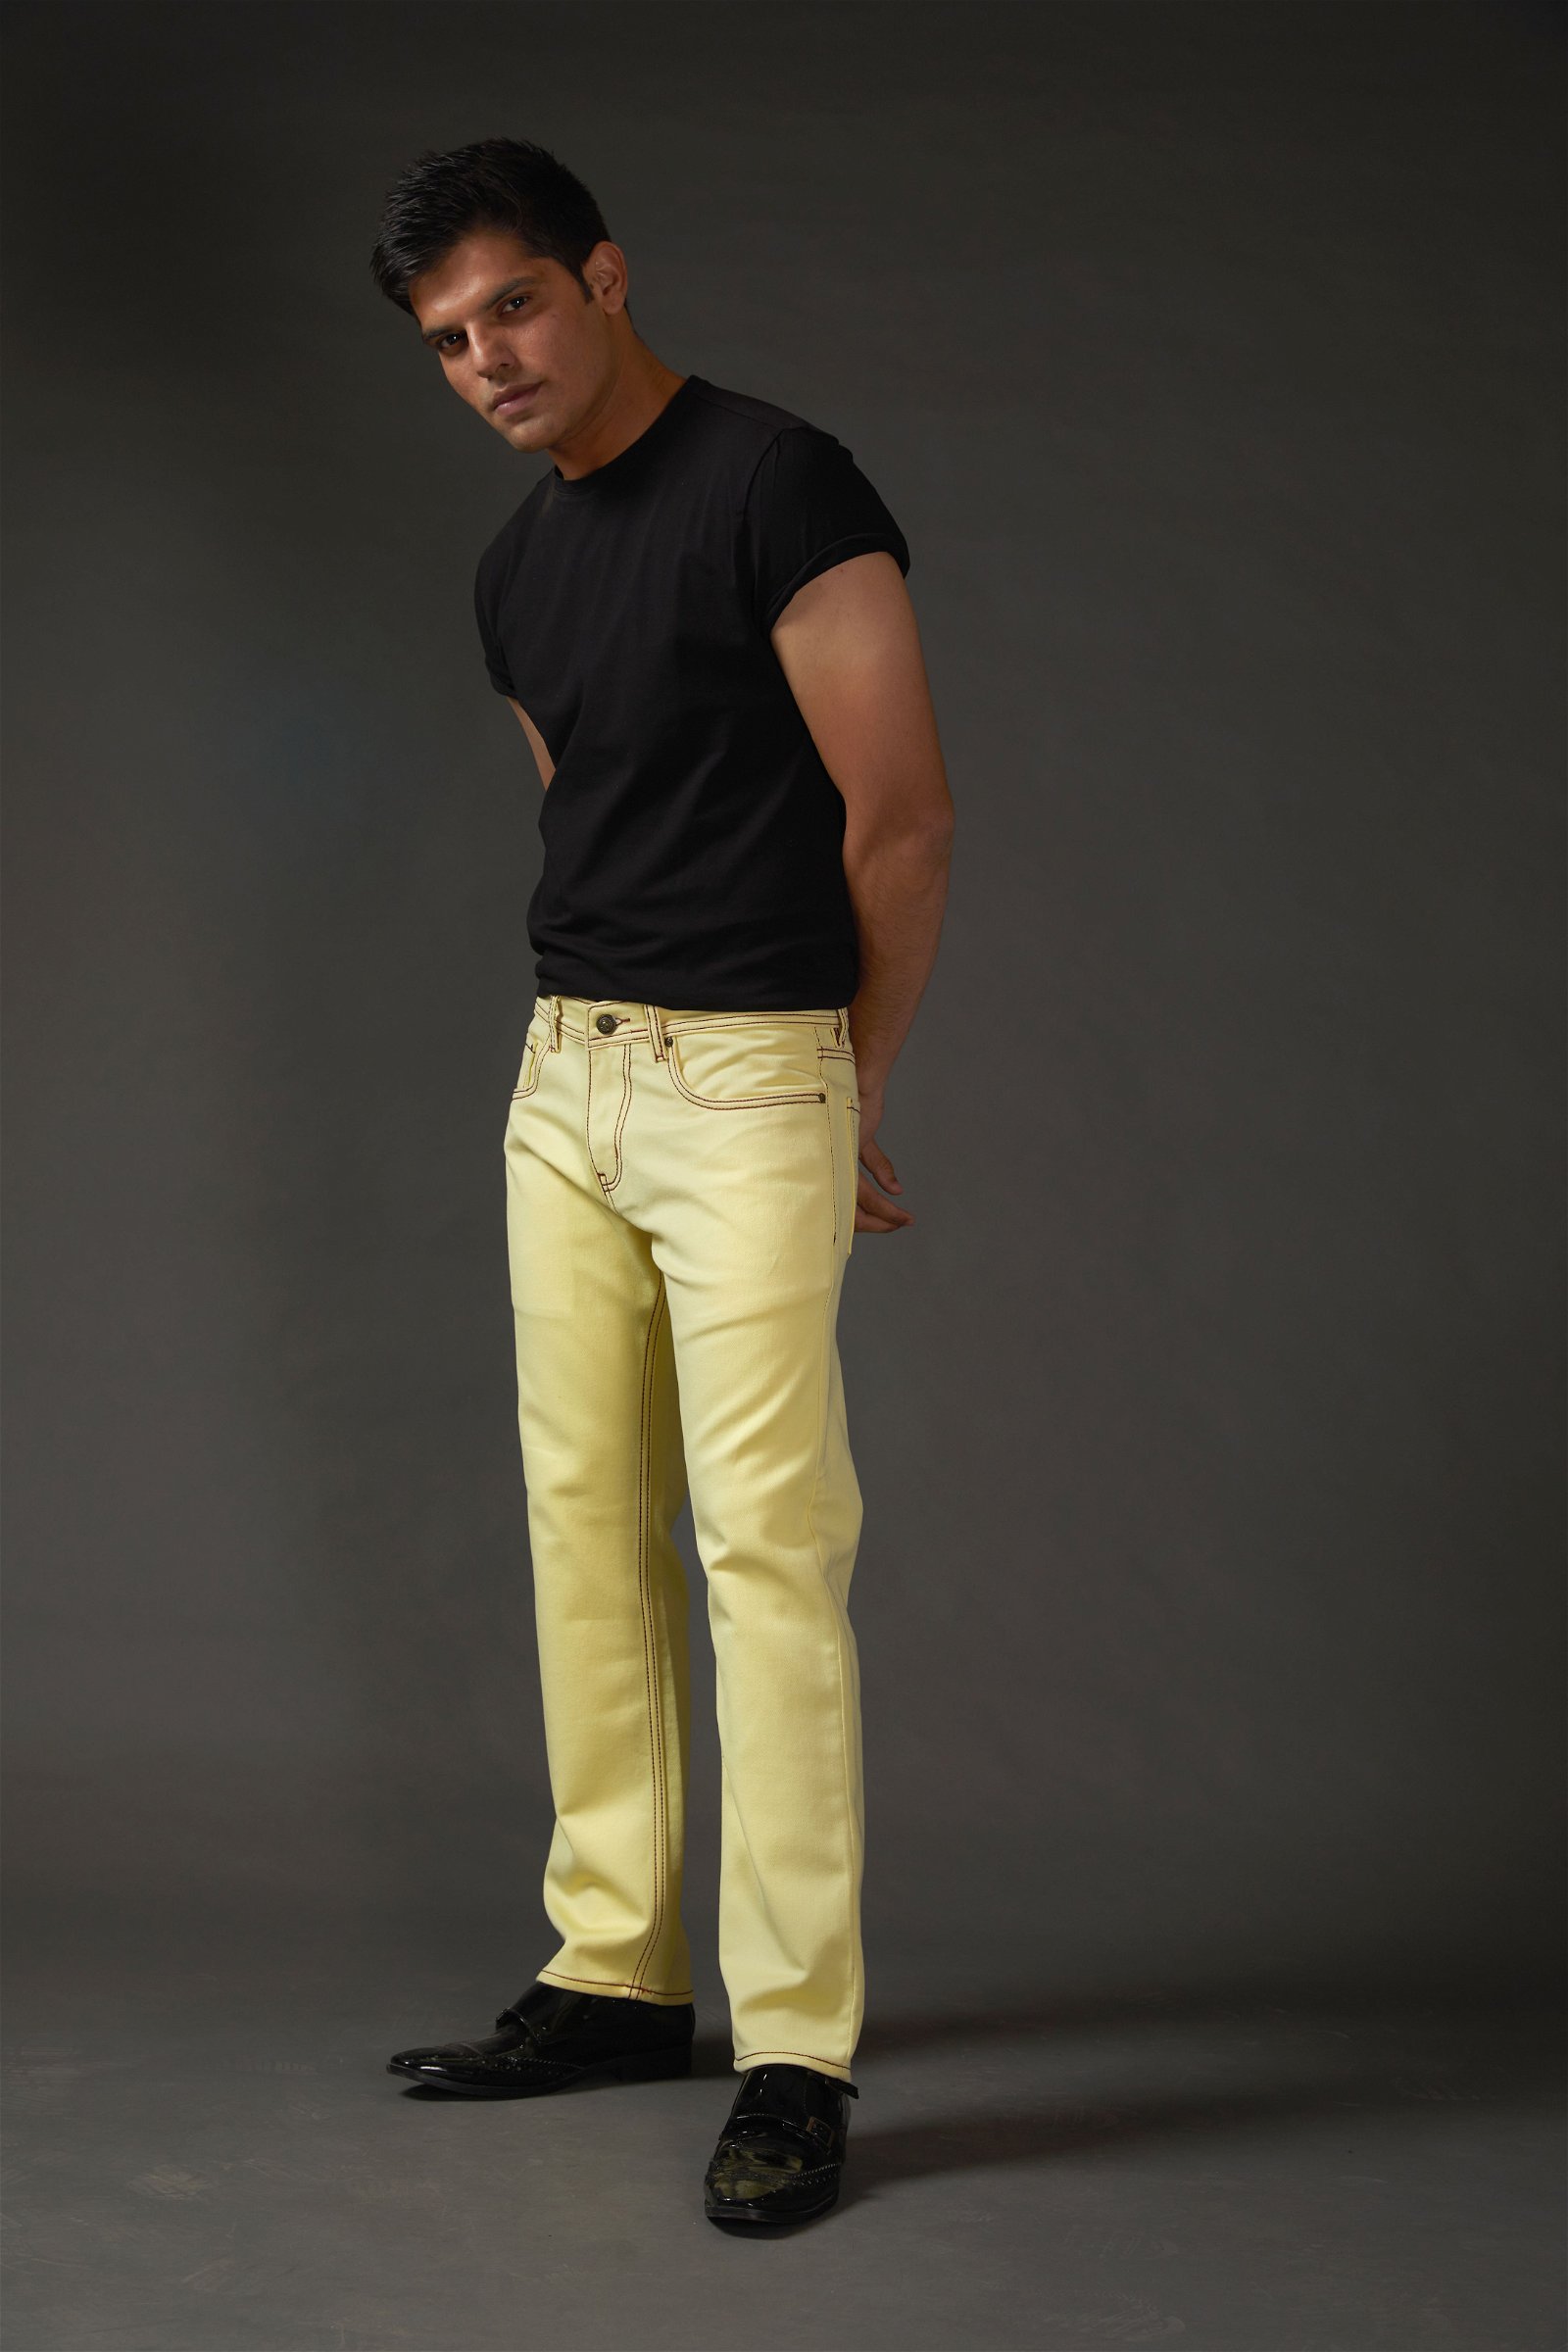 Buy Medallion Yellow Popcorn Textured Straight Fit Pant - Tistabene